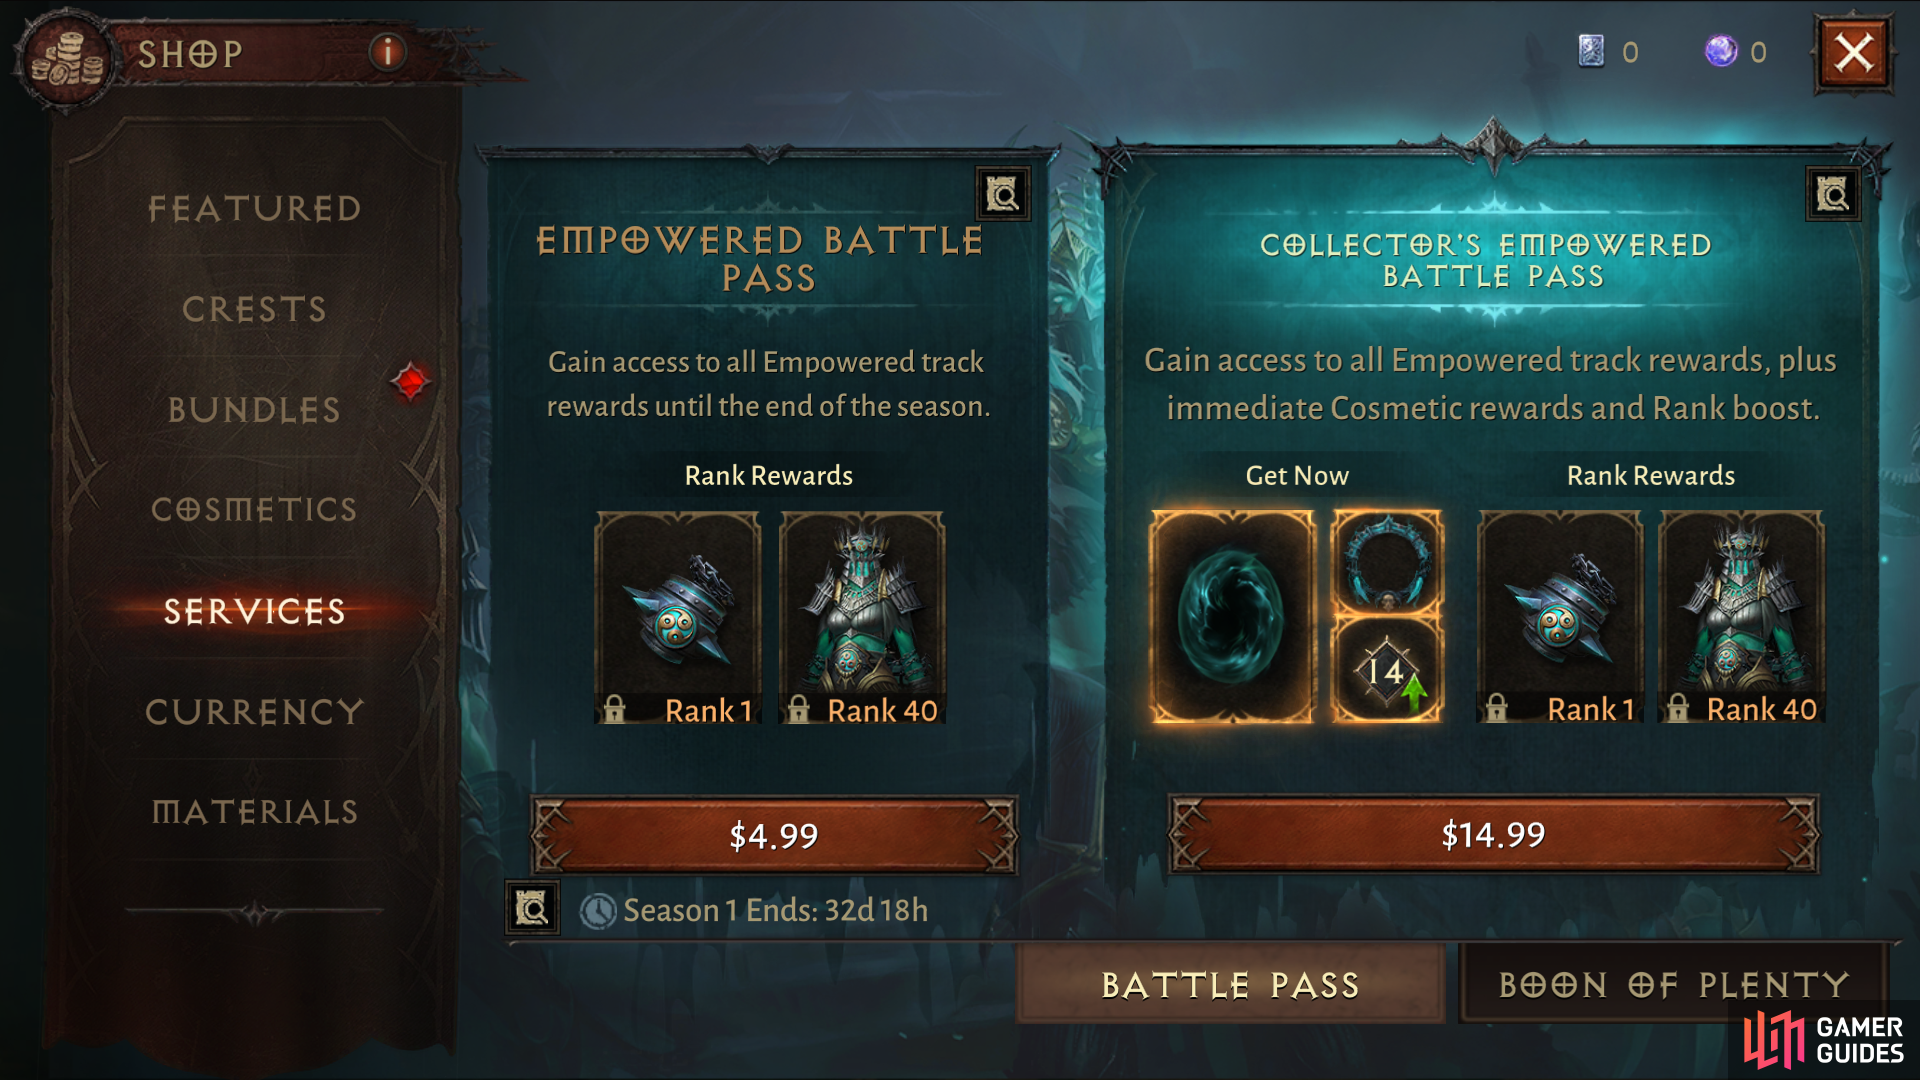 You can purchase two different grades of Empowered Battle Pass to unlock a bonus rewards track.